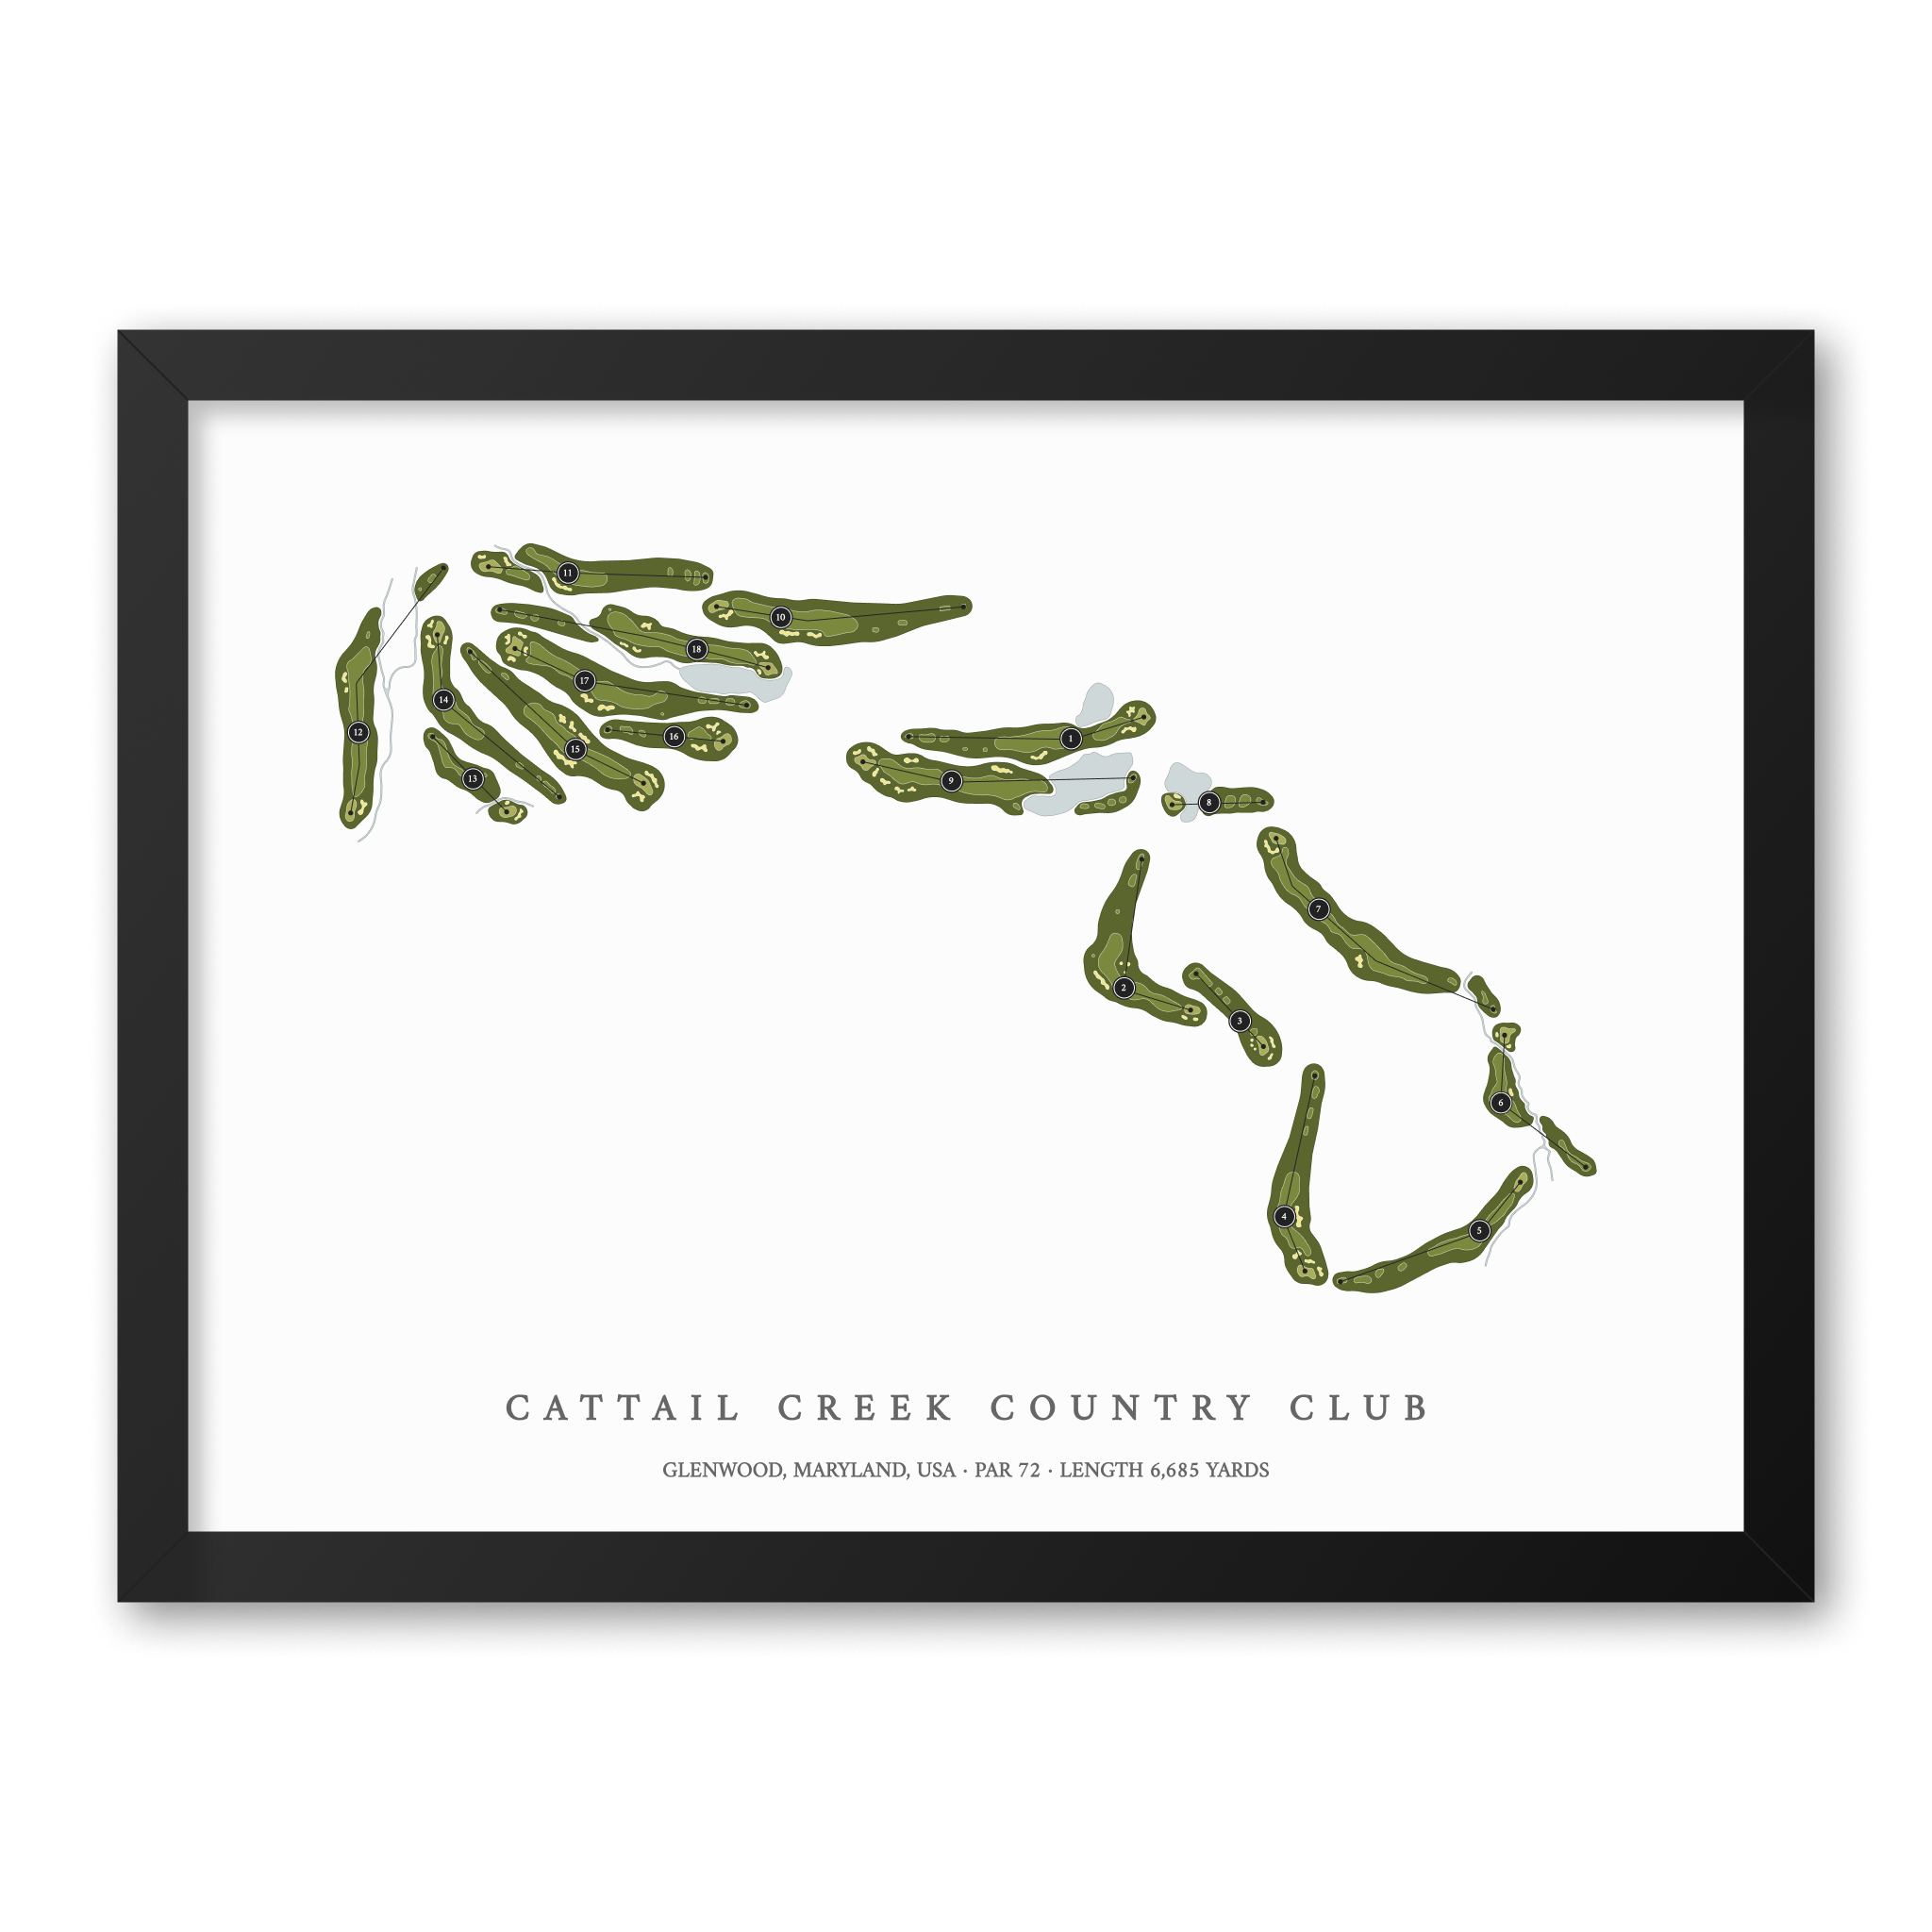 Cattail Creek Country Club | Golf Course Map | Black Frame